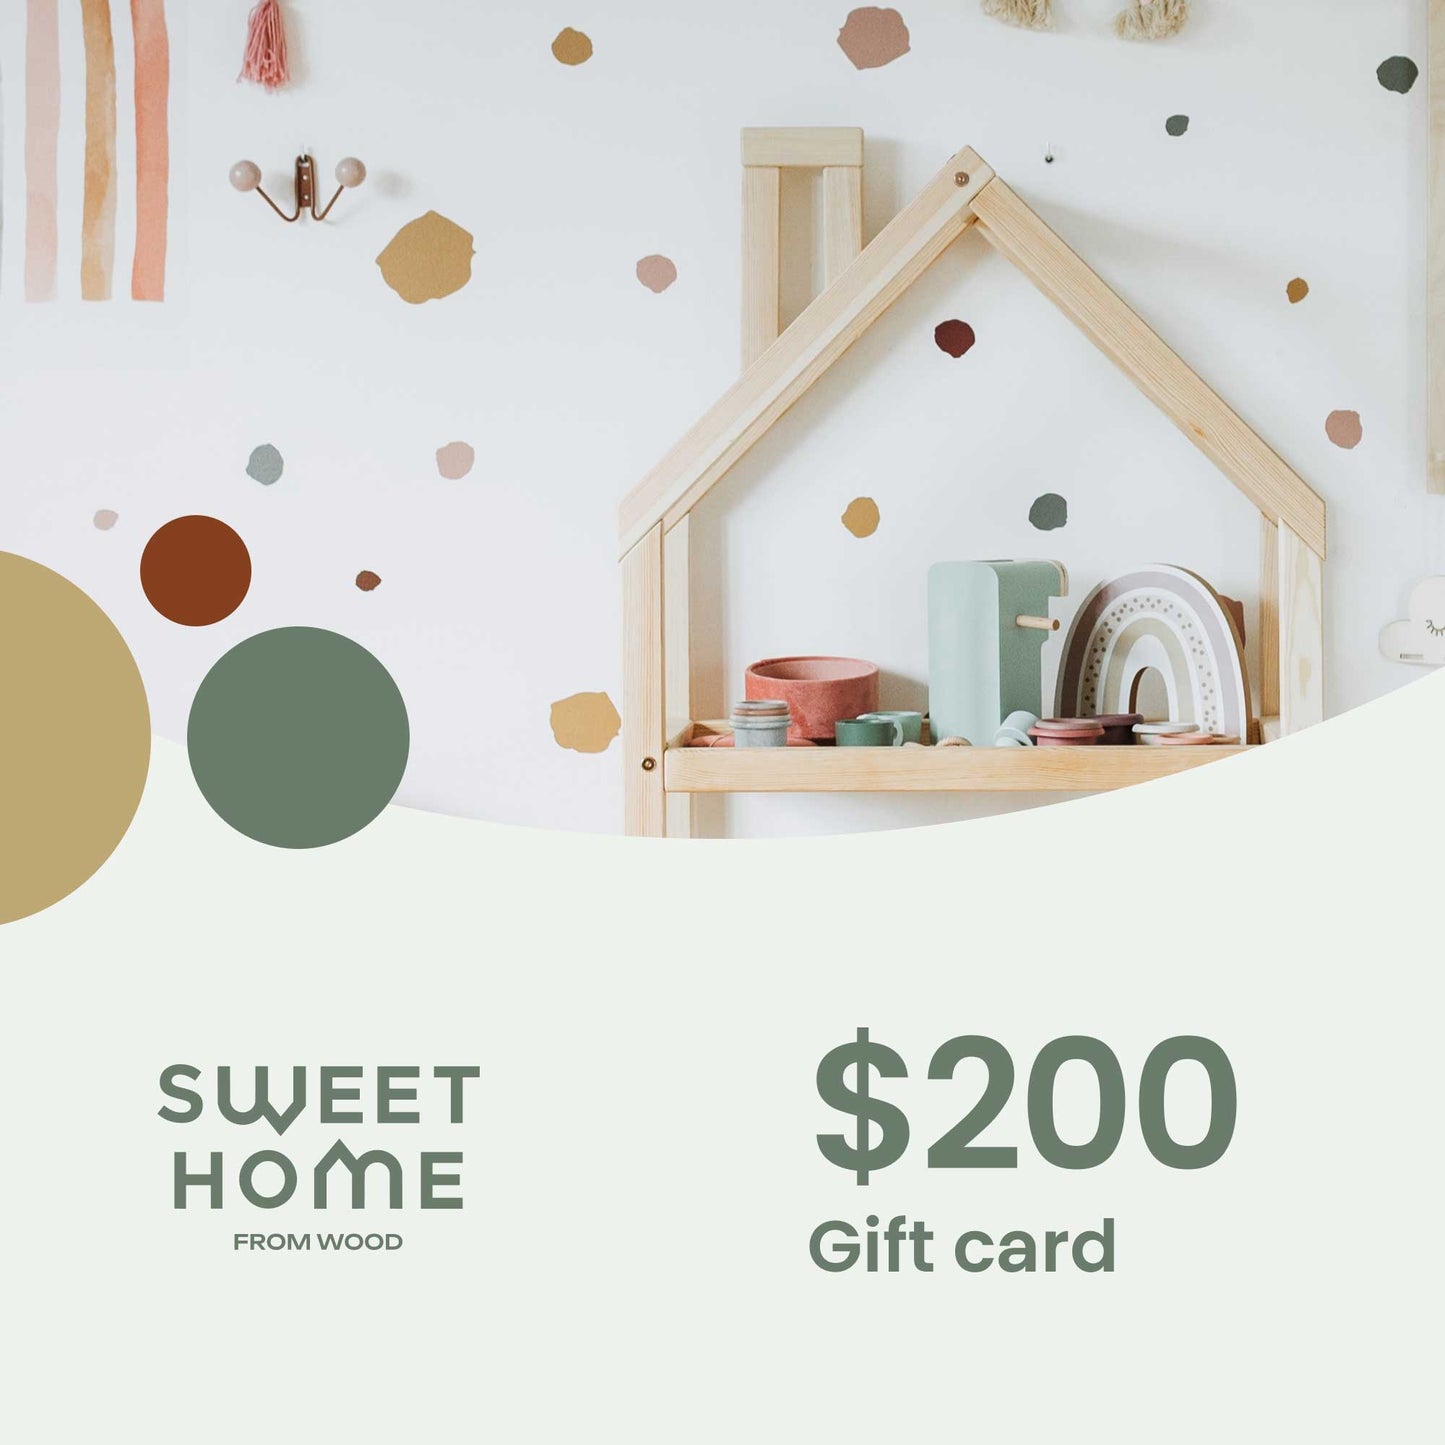 Gift card featuring a $200 USD value, ready for purchase or gifting.